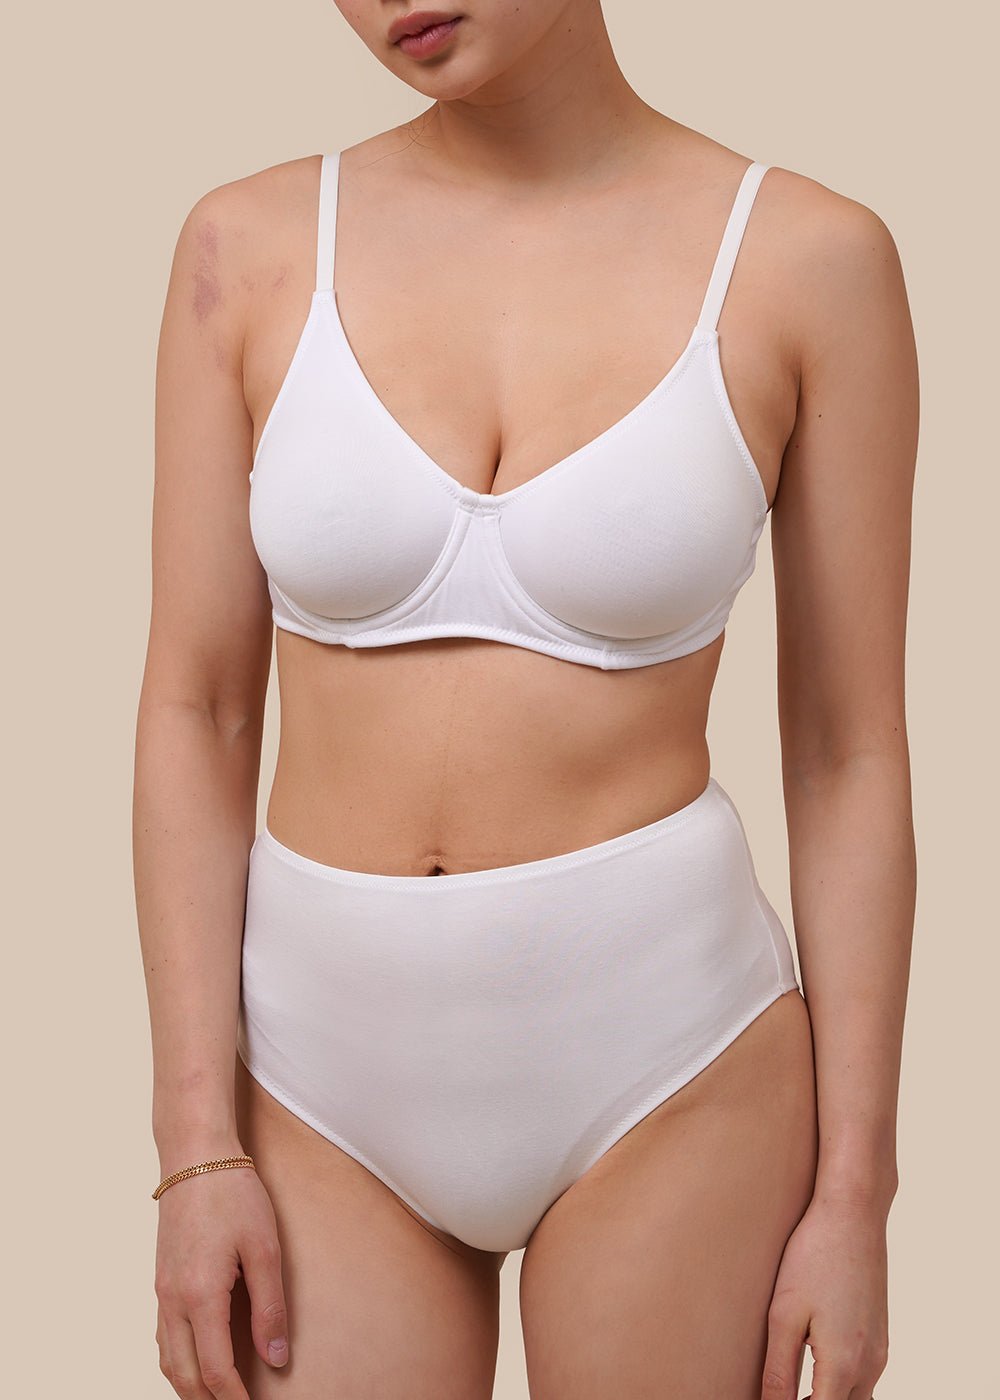 Perfectly Smooth Underwire Bra - Shop Now!